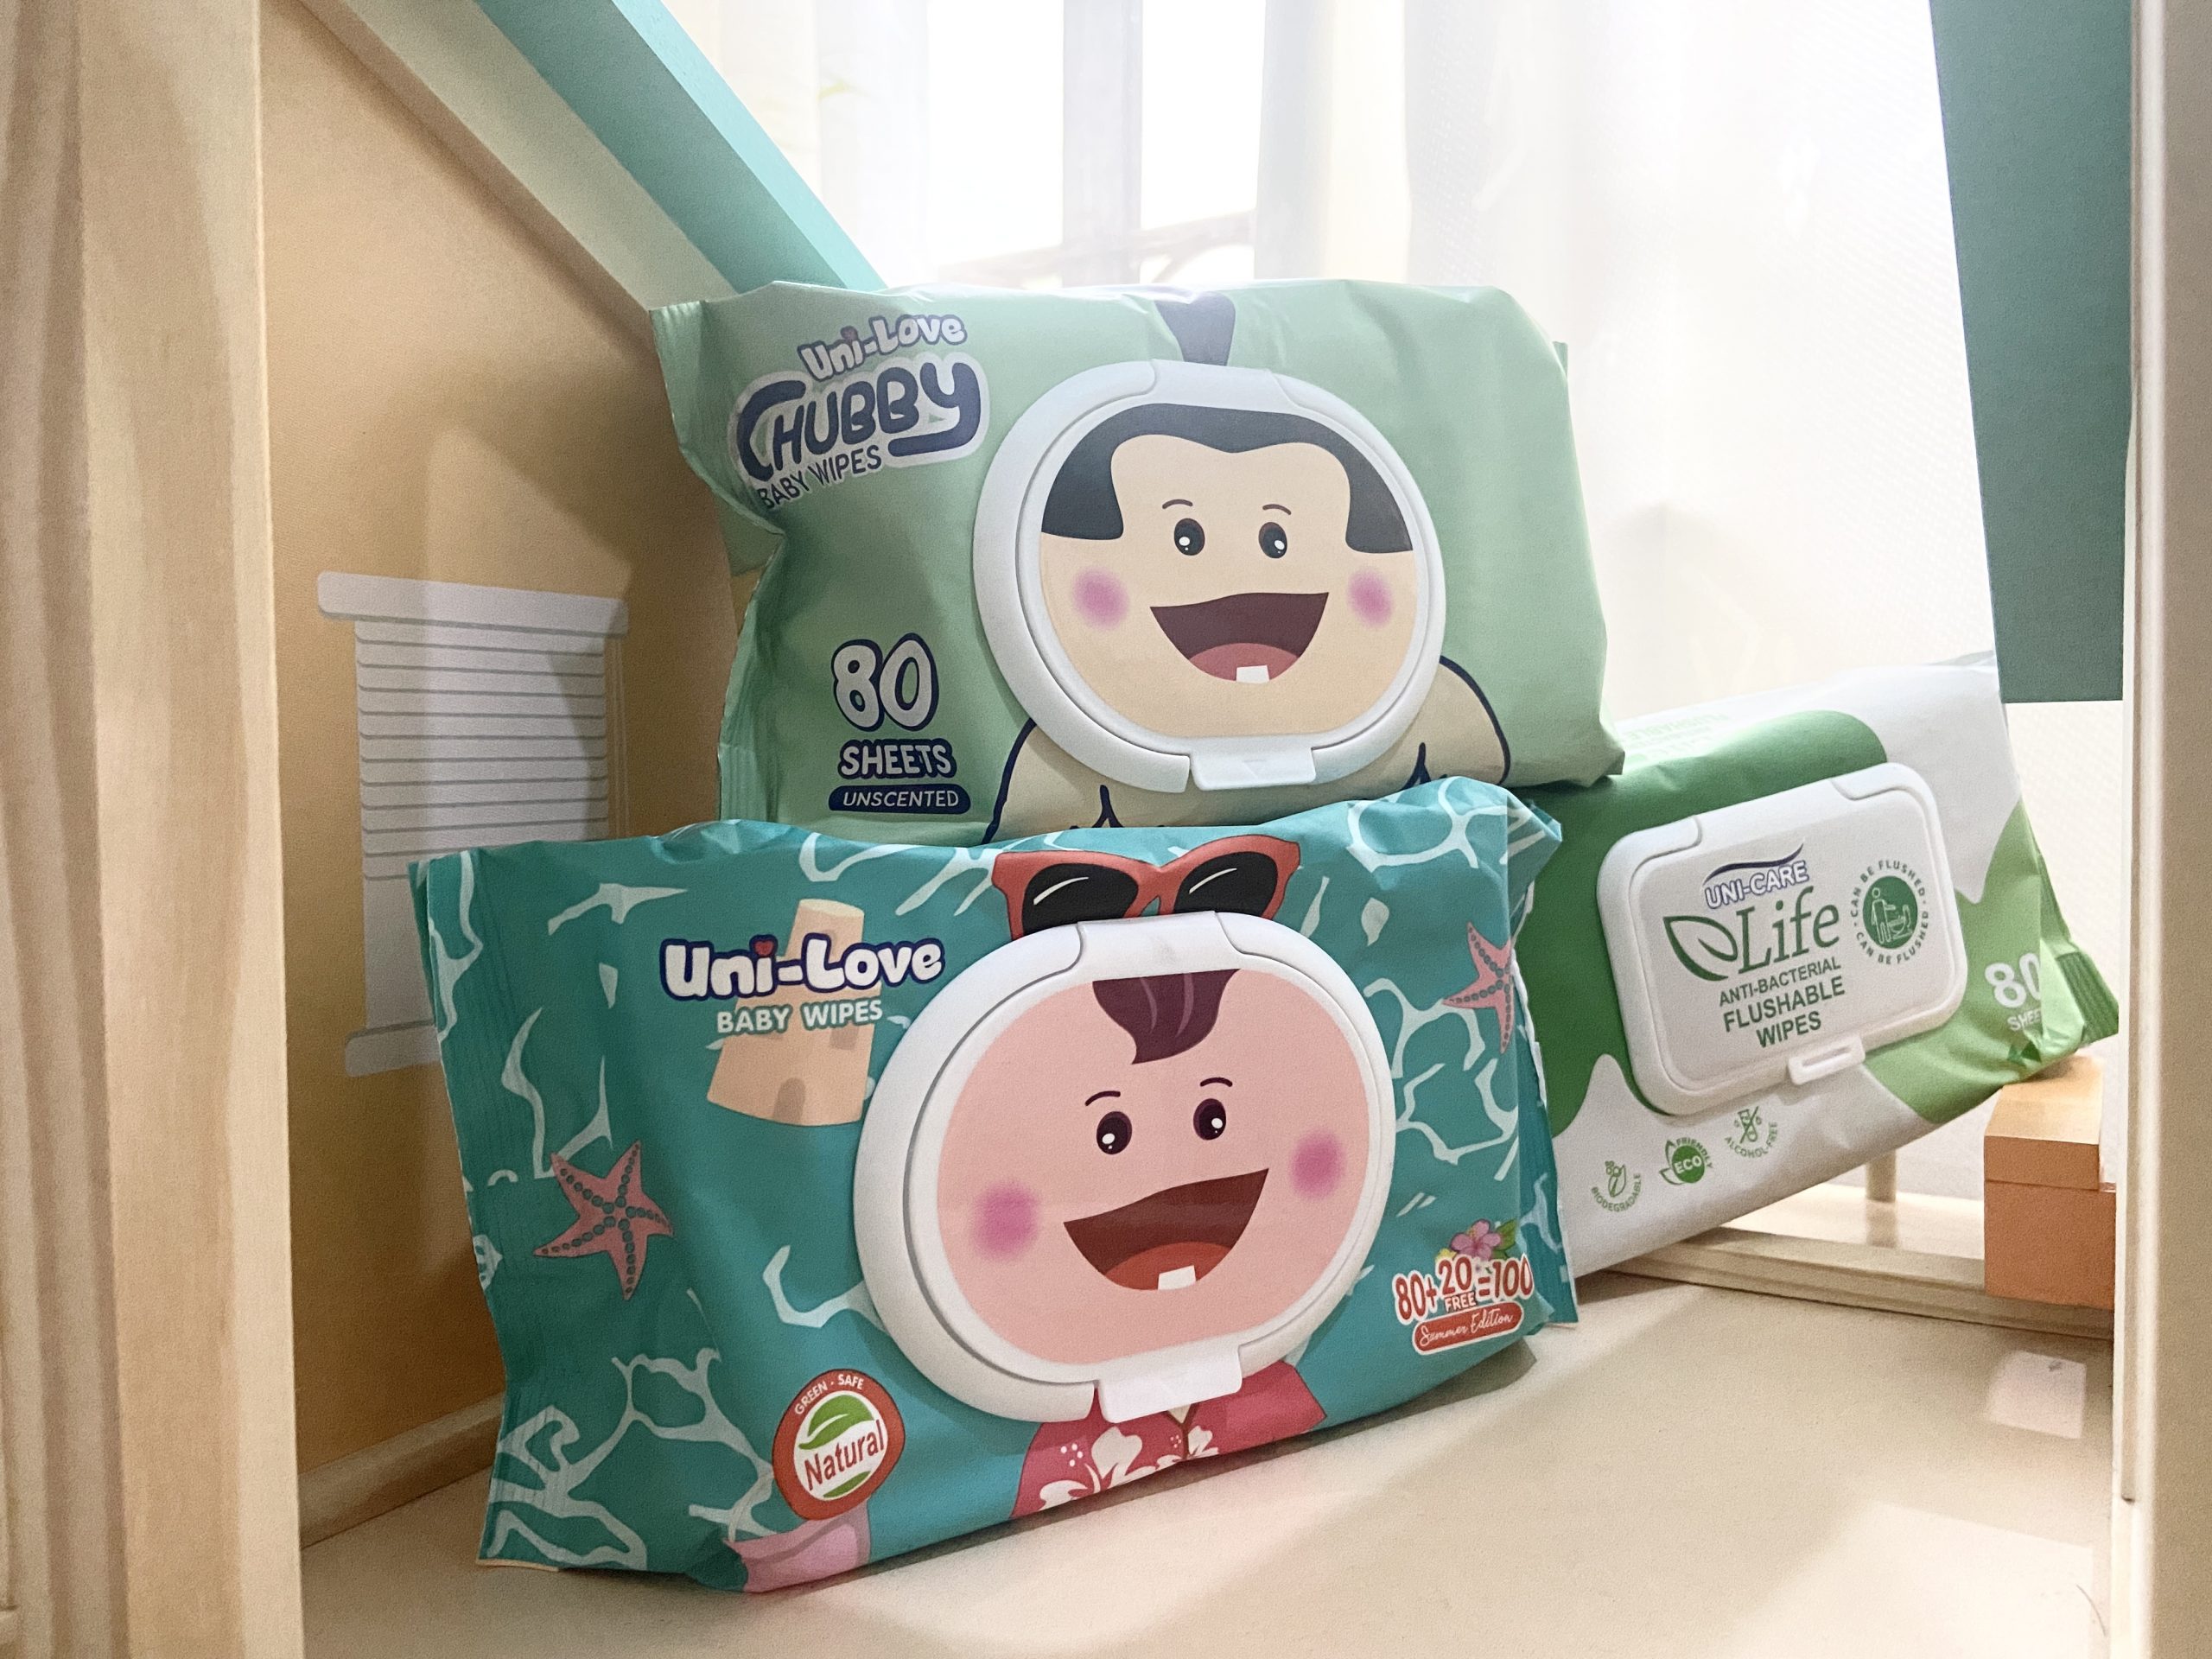 Uni-Care UniLove Baby Products are back on Shopee Brand Spotlight with the Cutest Baby Wipes in time for Summer